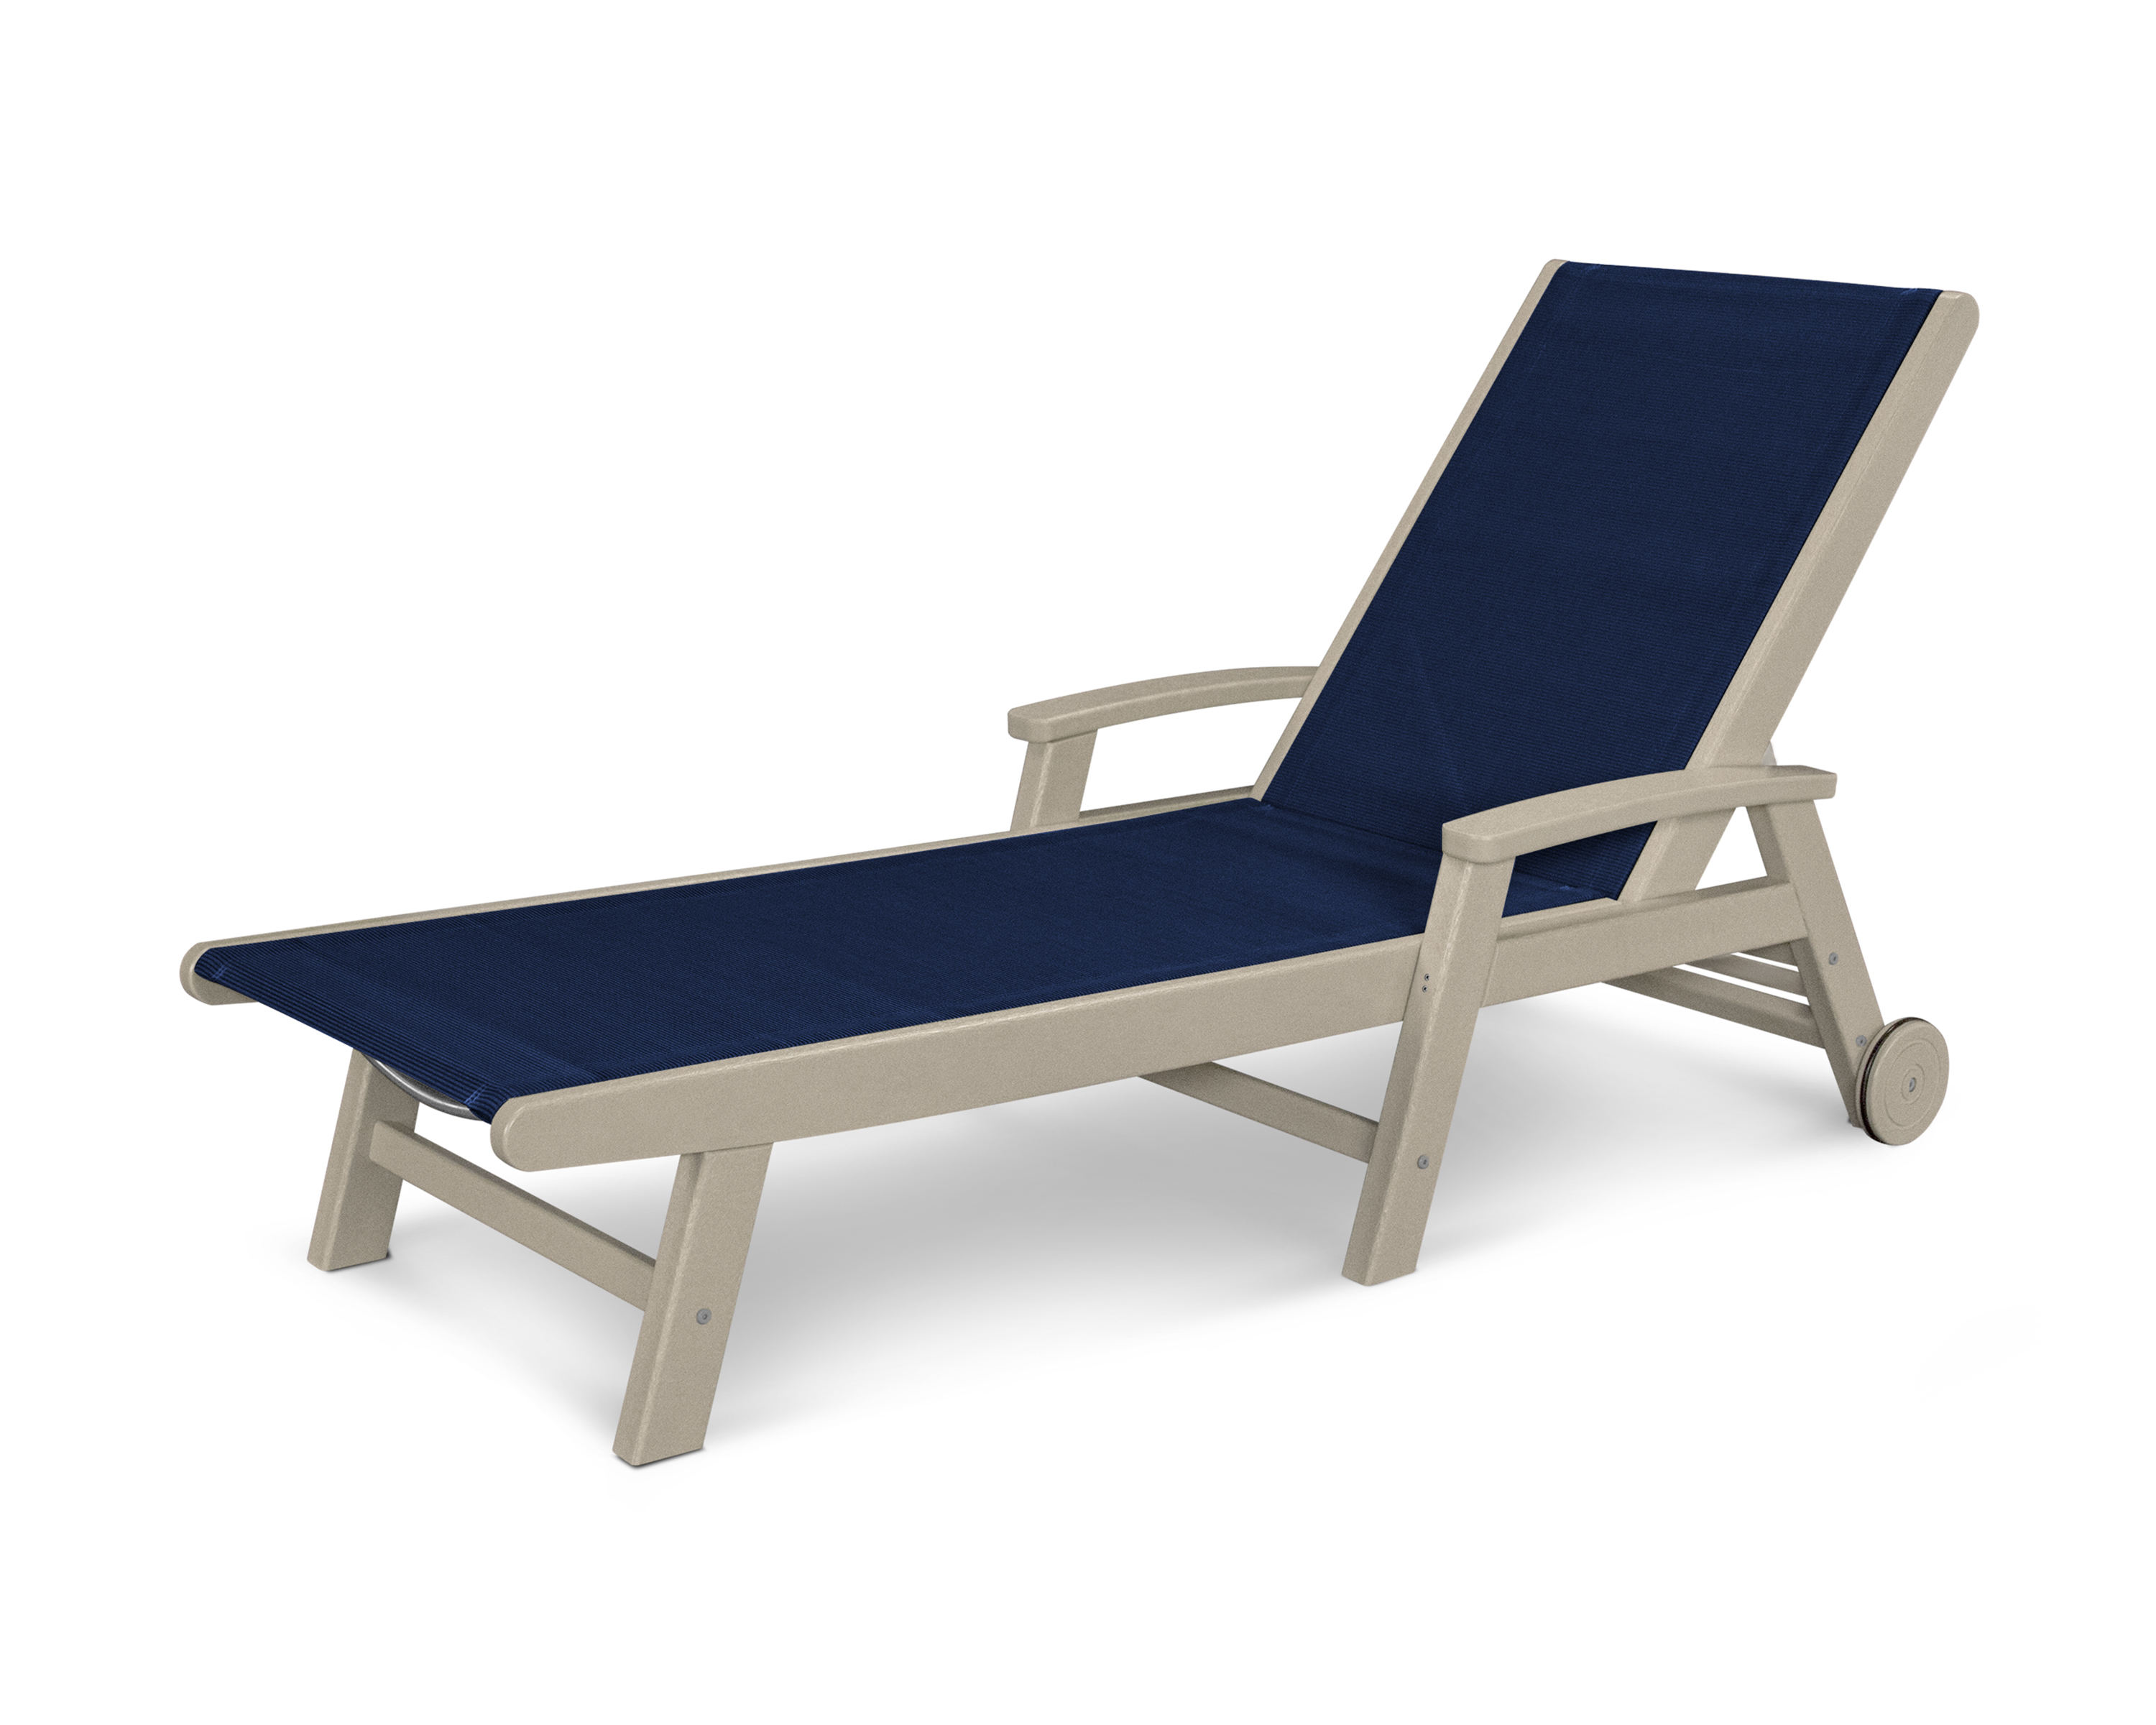 coastal chaise with wheels in sand / navy blue sling thumbnail image